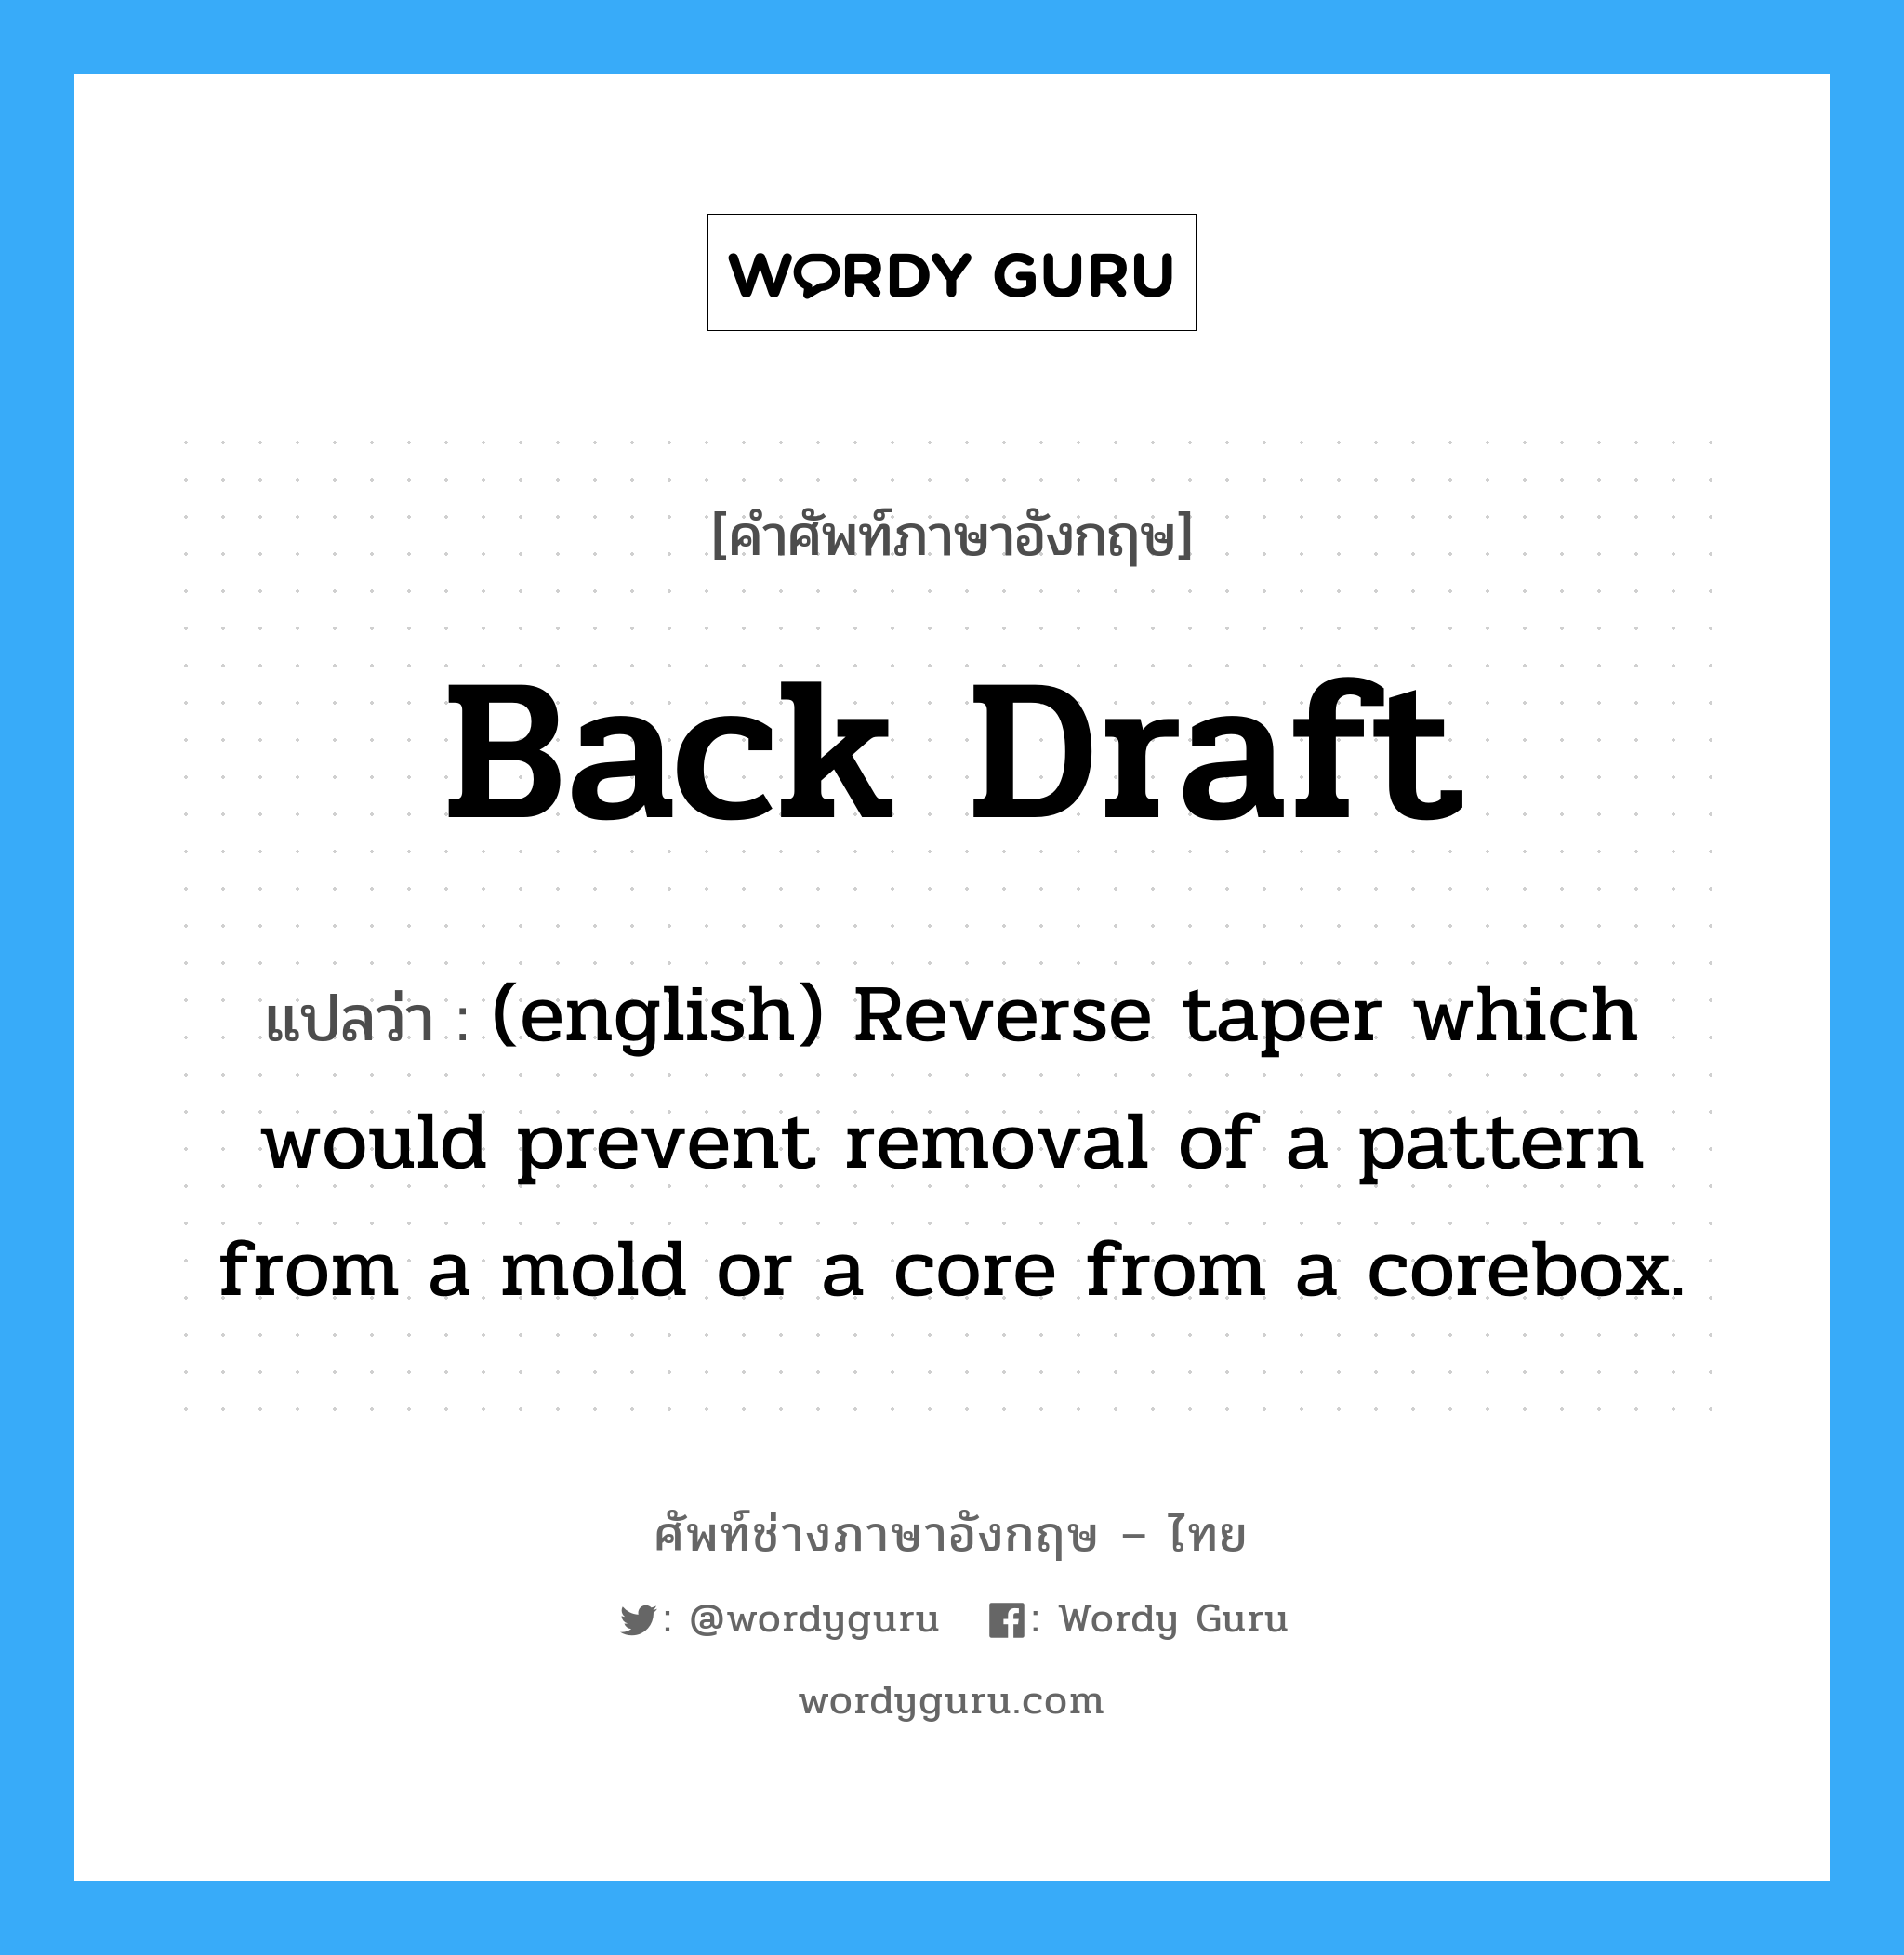 Back Draft แปลว่า?, คำศัพท์ช่างภาษาอังกฤษ - ไทย Back Draft คำศัพท์ภาษาอังกฤษ Back Draft แปลว่า (english) Reverse taper which would prevent removal of a pattern from a mold or a core from a corebox.